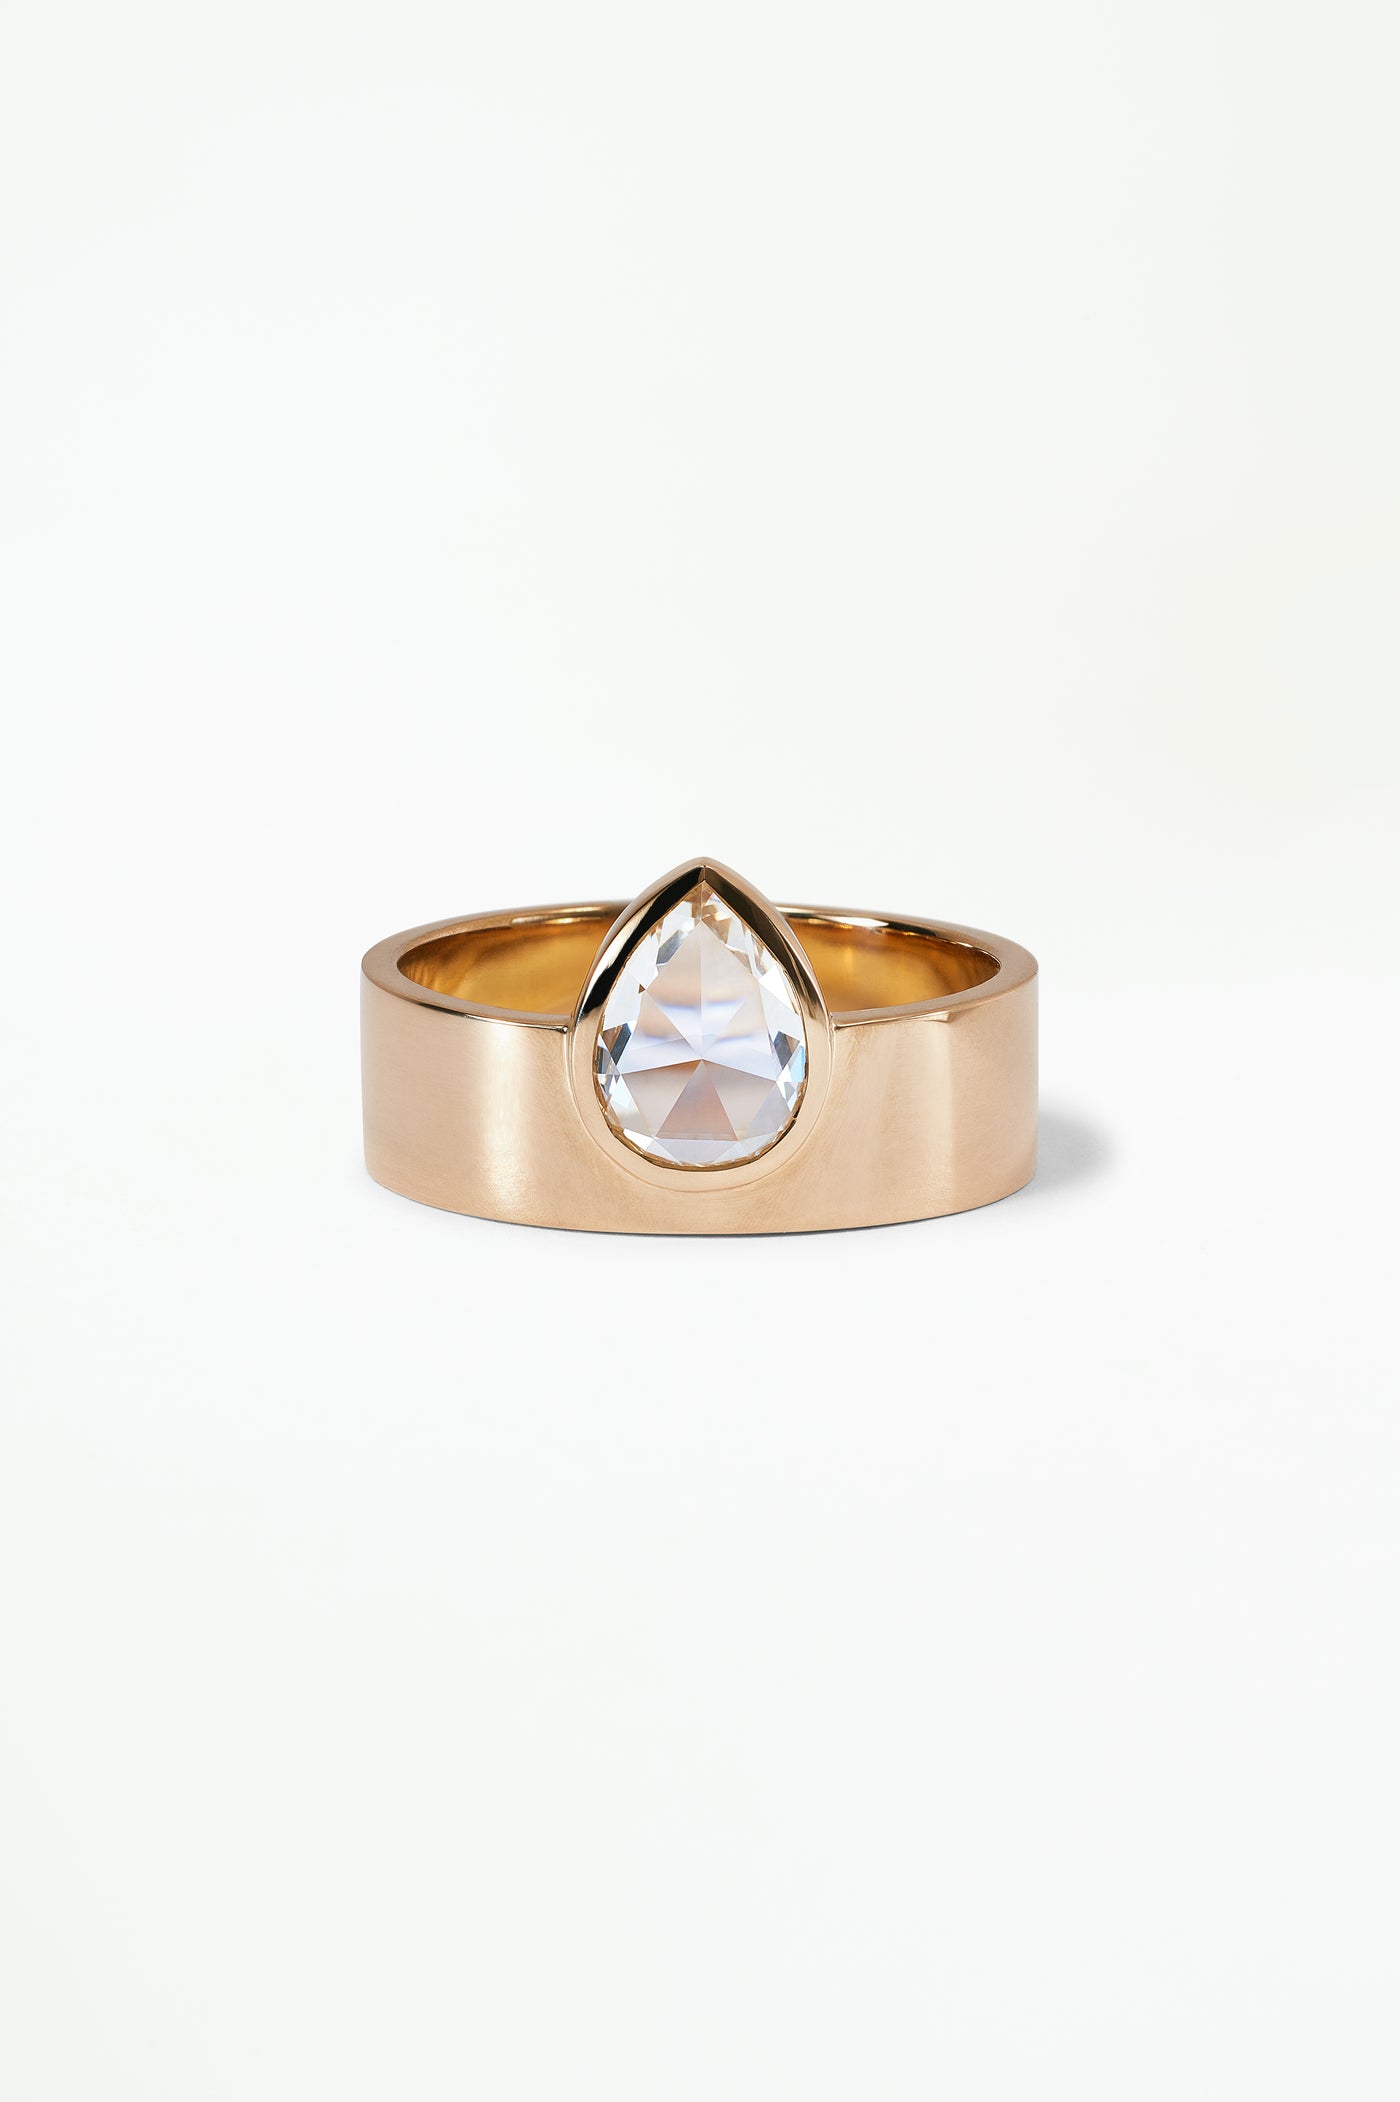 One of a Kind Pear Rose Cut Diamond Monolith Ring No. 35